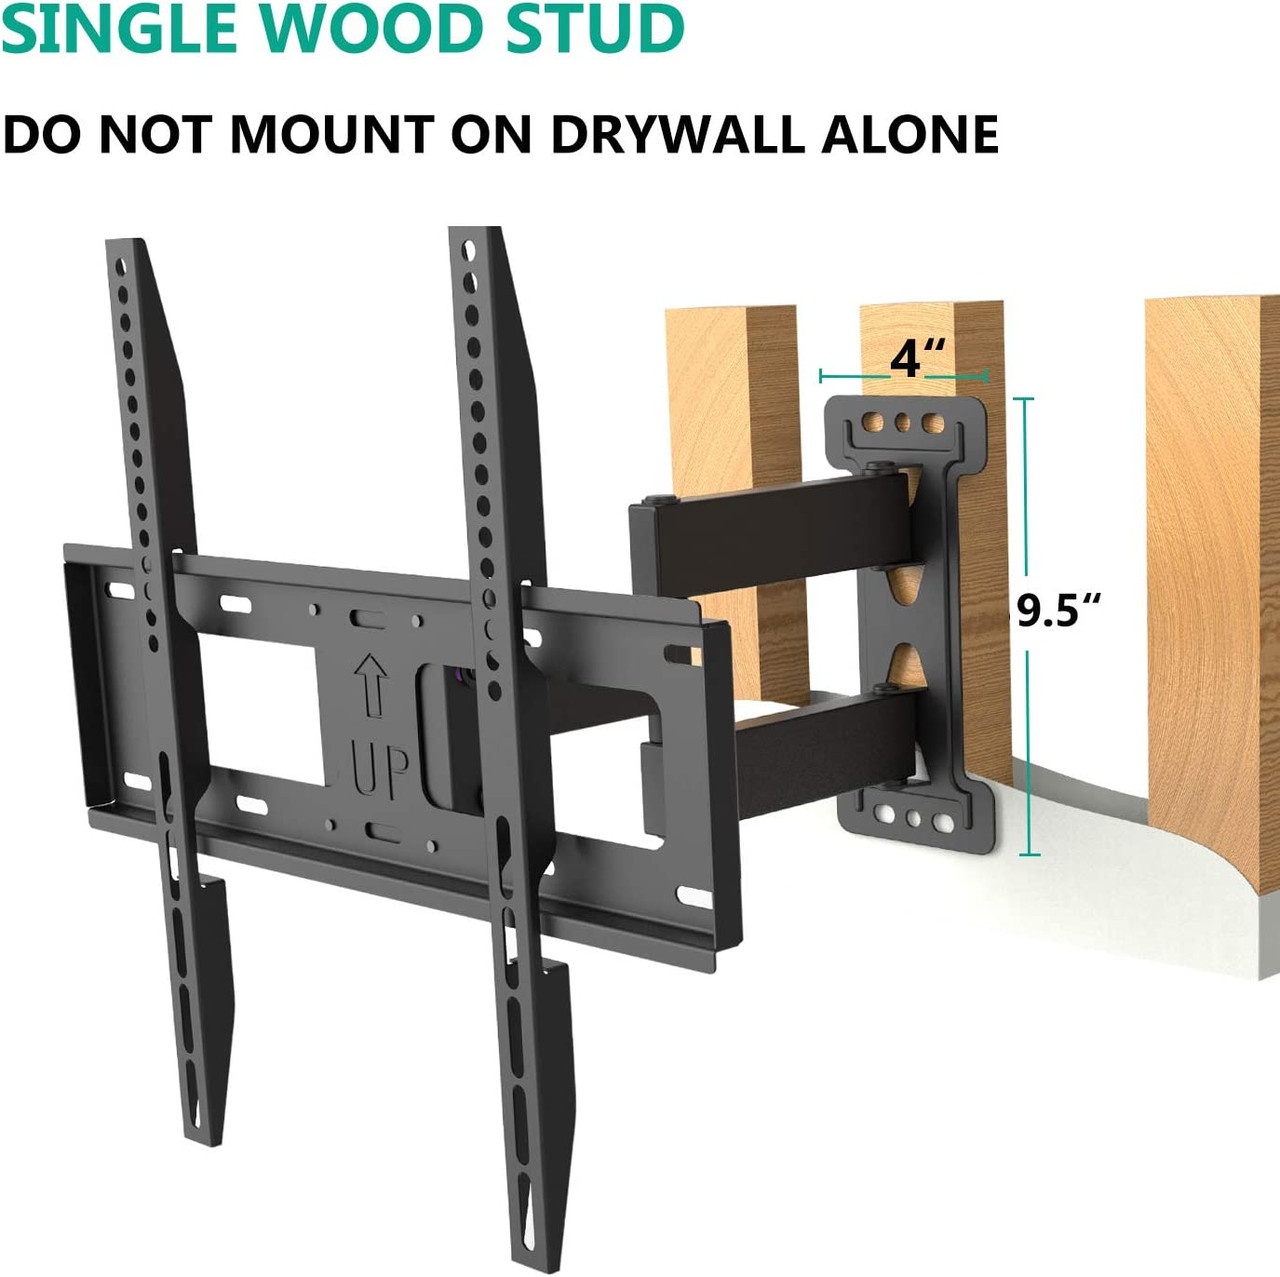 TV Wall Mount Bracket Full Motion Articulating Extend Arm for Most 23-55 inches LED, LCD, OLED Flat Screen TVs up to 99lbs VESA 400x400mm with Tilting for Display (FTM-1), Black